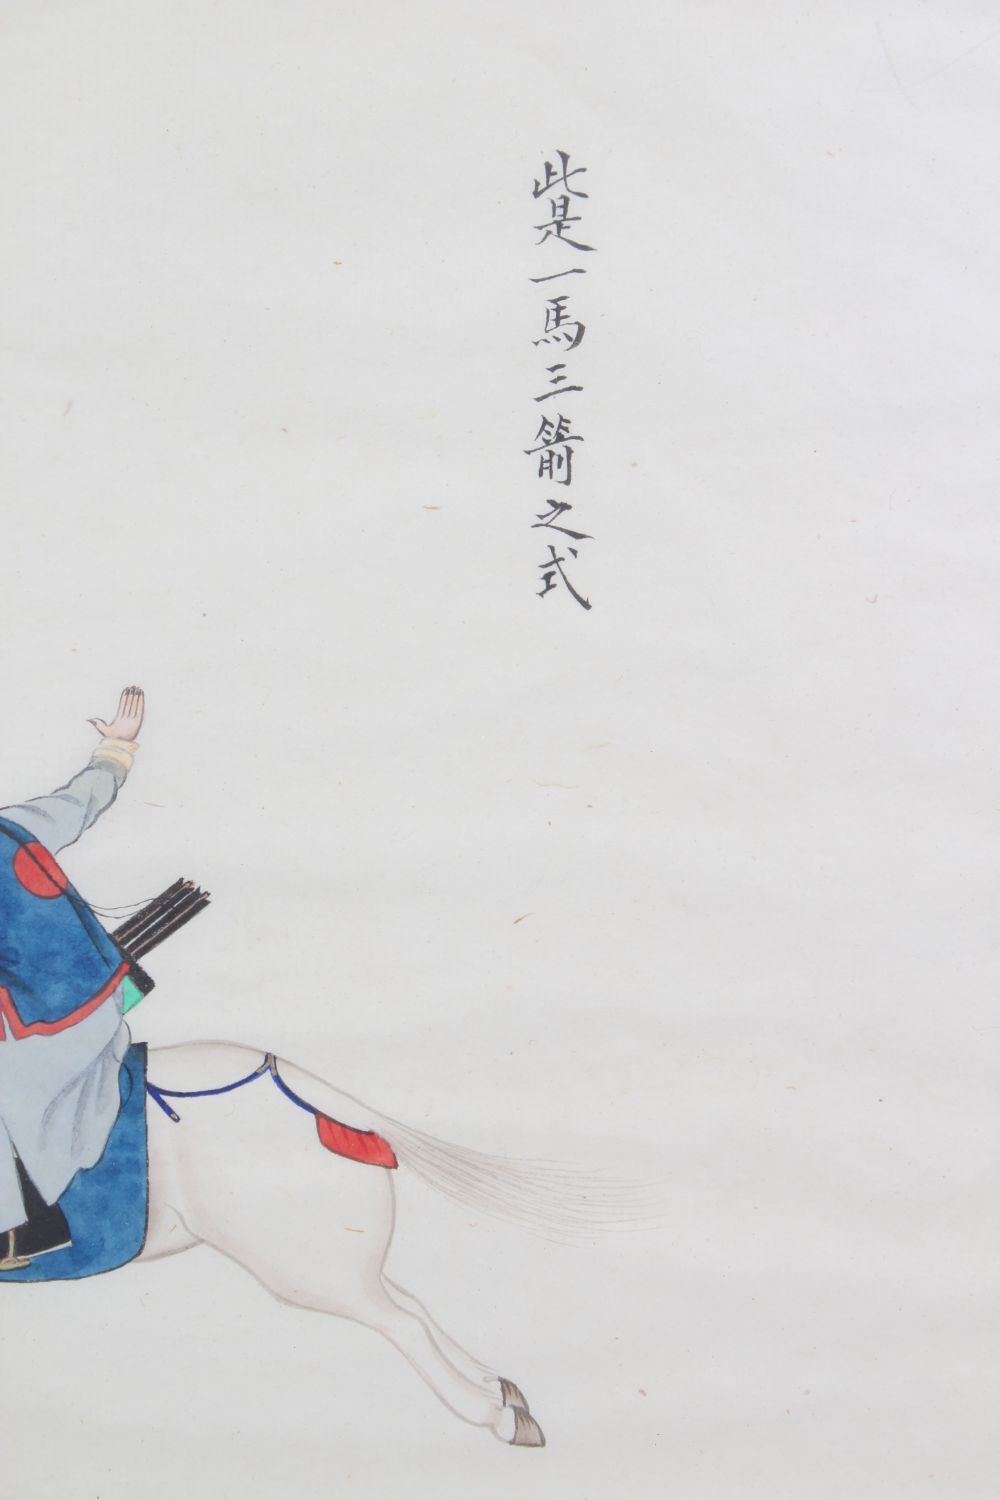 TWO 19TH CENTURY CHINESE PAINTINGS ON PAPER - HORSES & ACTORS, the pictures depicting a figure on - Image 8 of 9